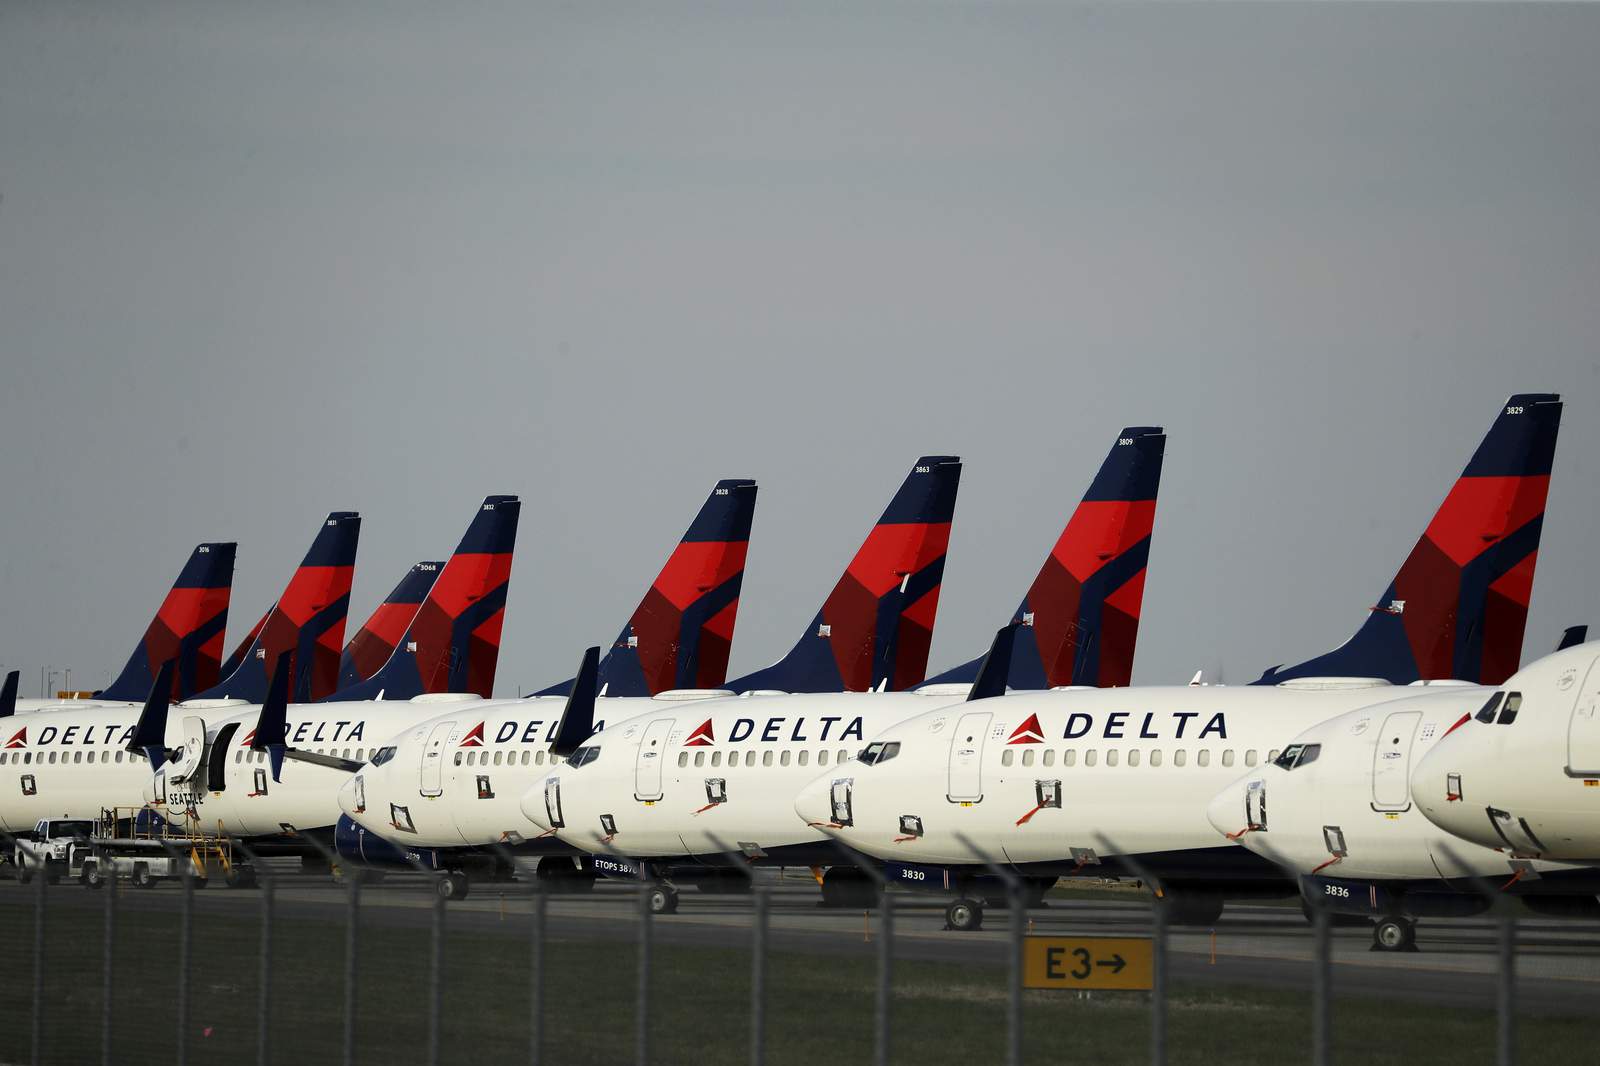 Delta Airlines CEO says 500 employees have tested positive for COVID-19 and 10 died